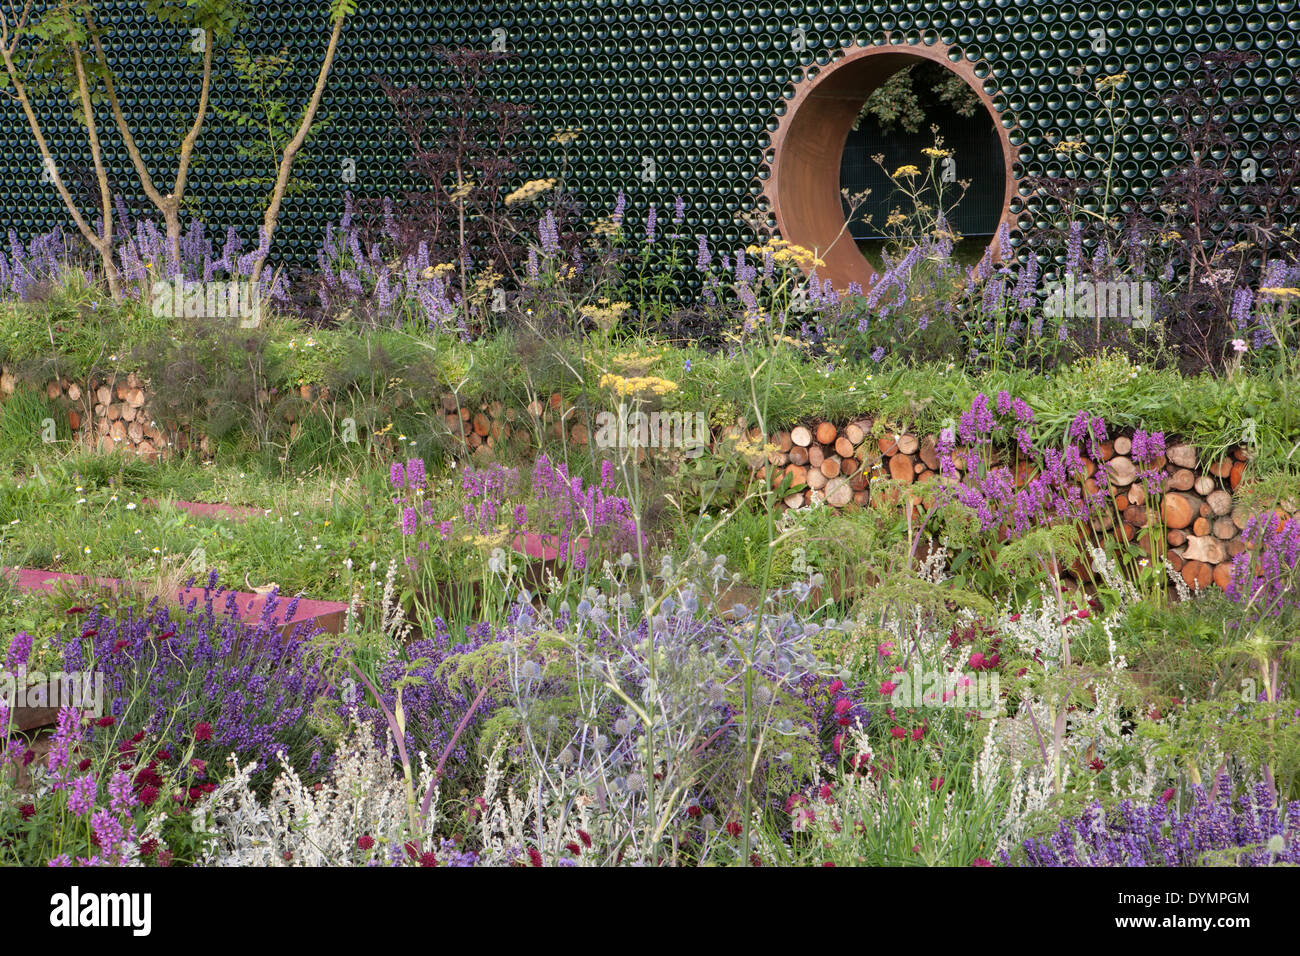 A small wildlife eco friendly garden wall fence made with old repurposed bottles insect friendly log pile habitat planting of herbs and wildflowers UK Stock Photo